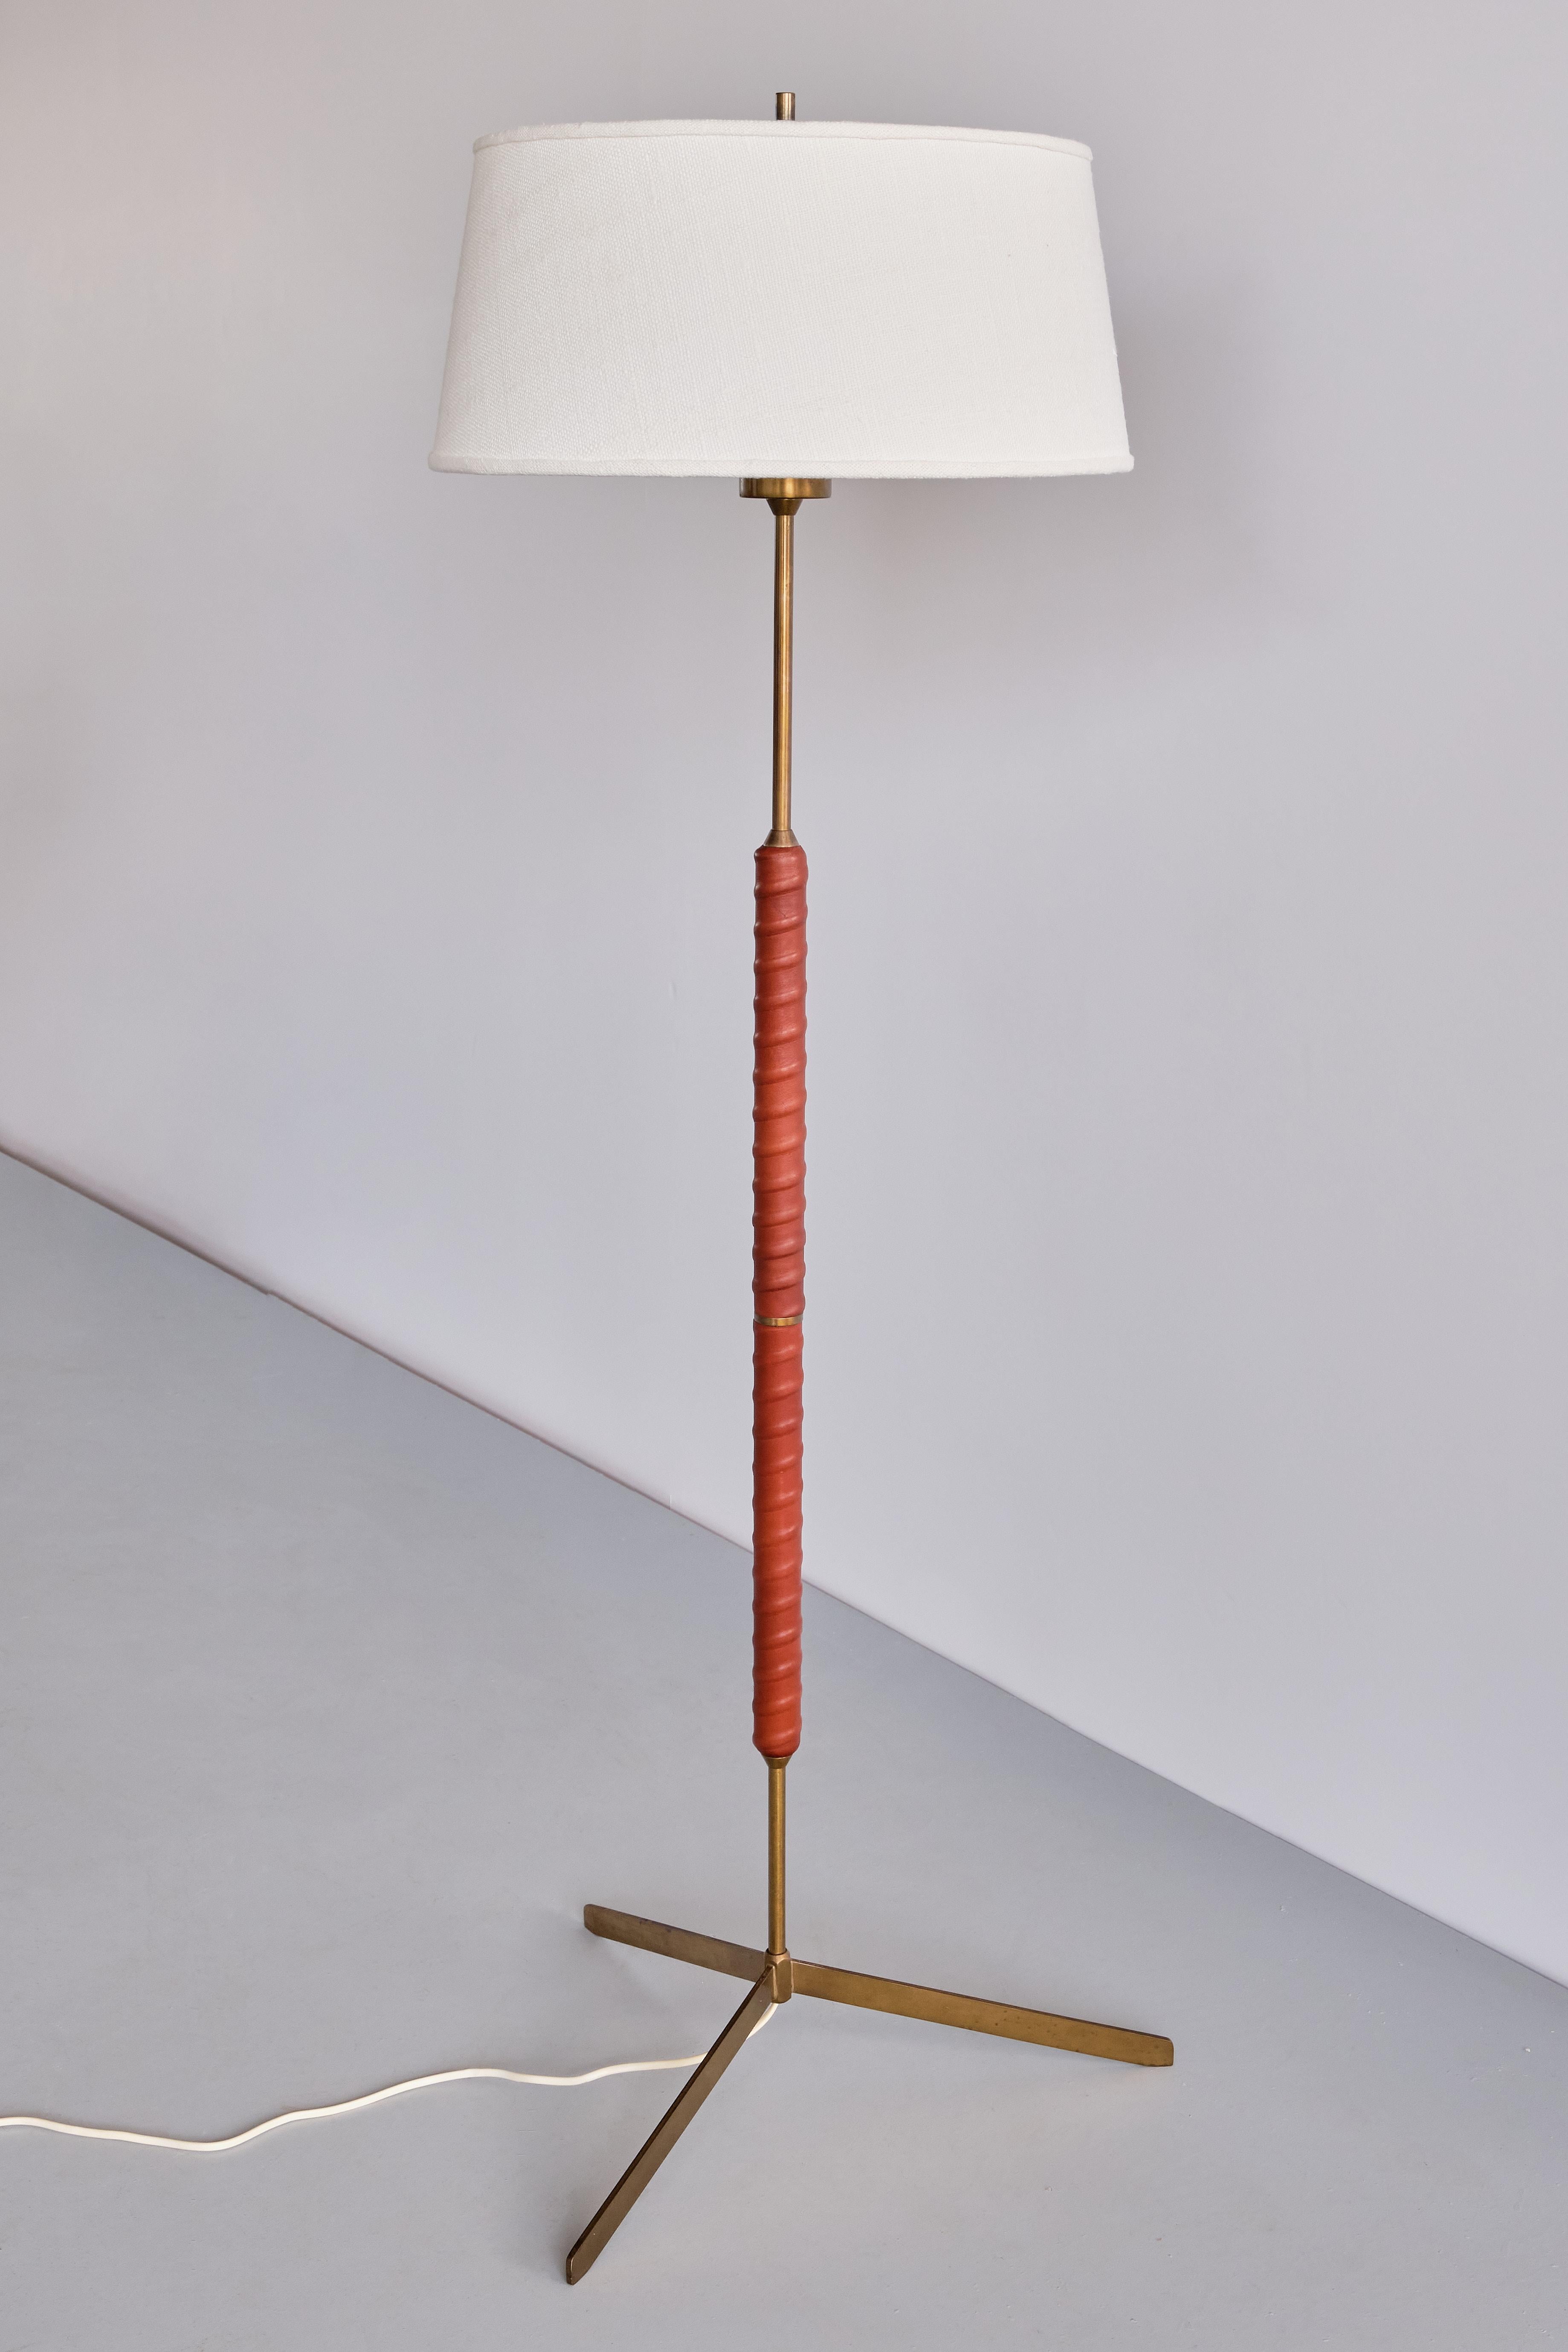 Scandinavian Modern Pair of Bergboms G-31 Floor Lamps in Brass, Leather and Linen, Sweden, 1940s For Sale